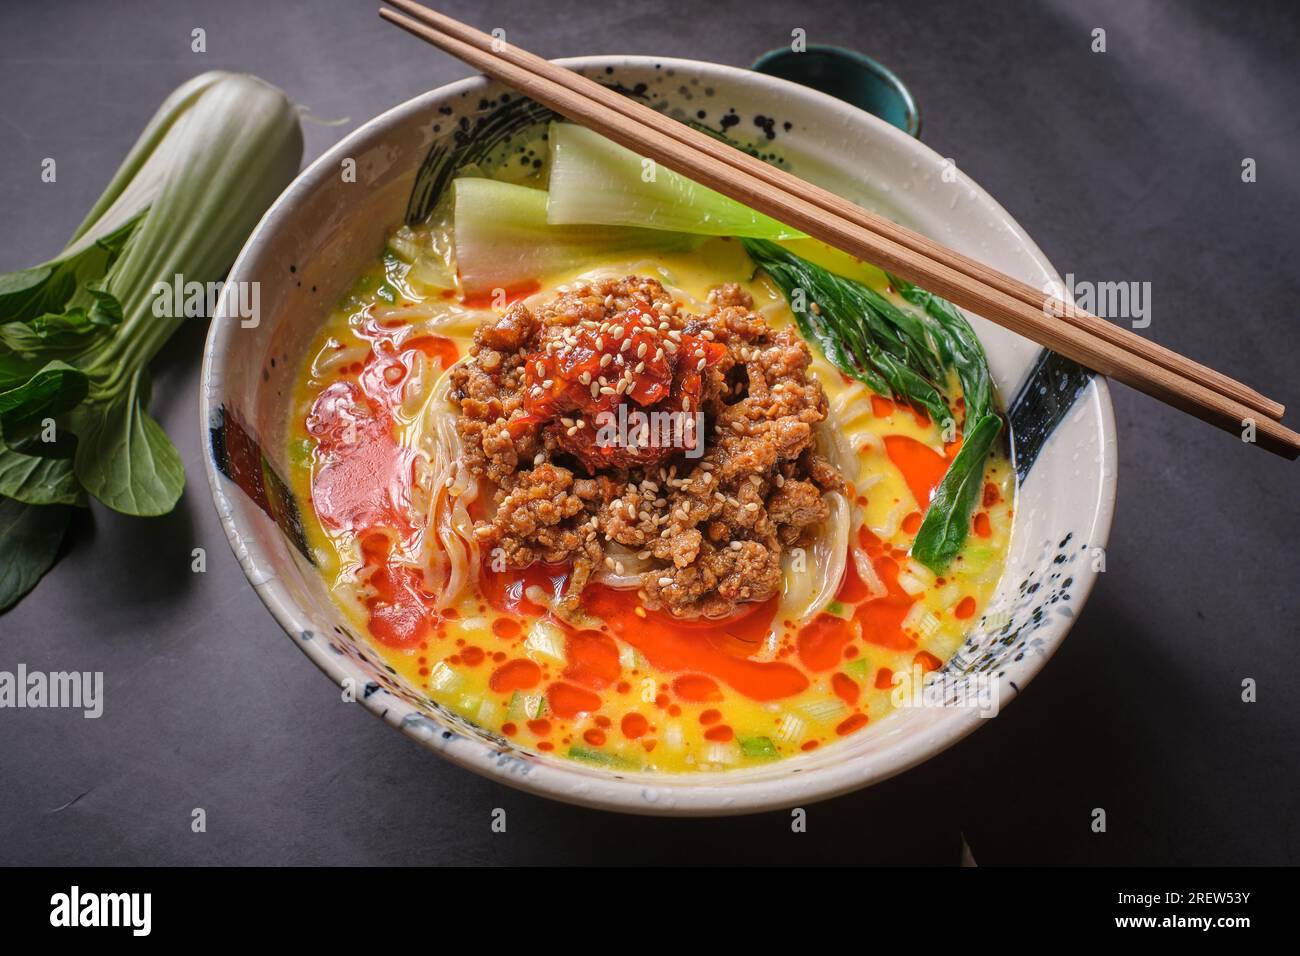 Stock photo of yummy noodles soup with minced meat isolated in grey background. Stock Photo